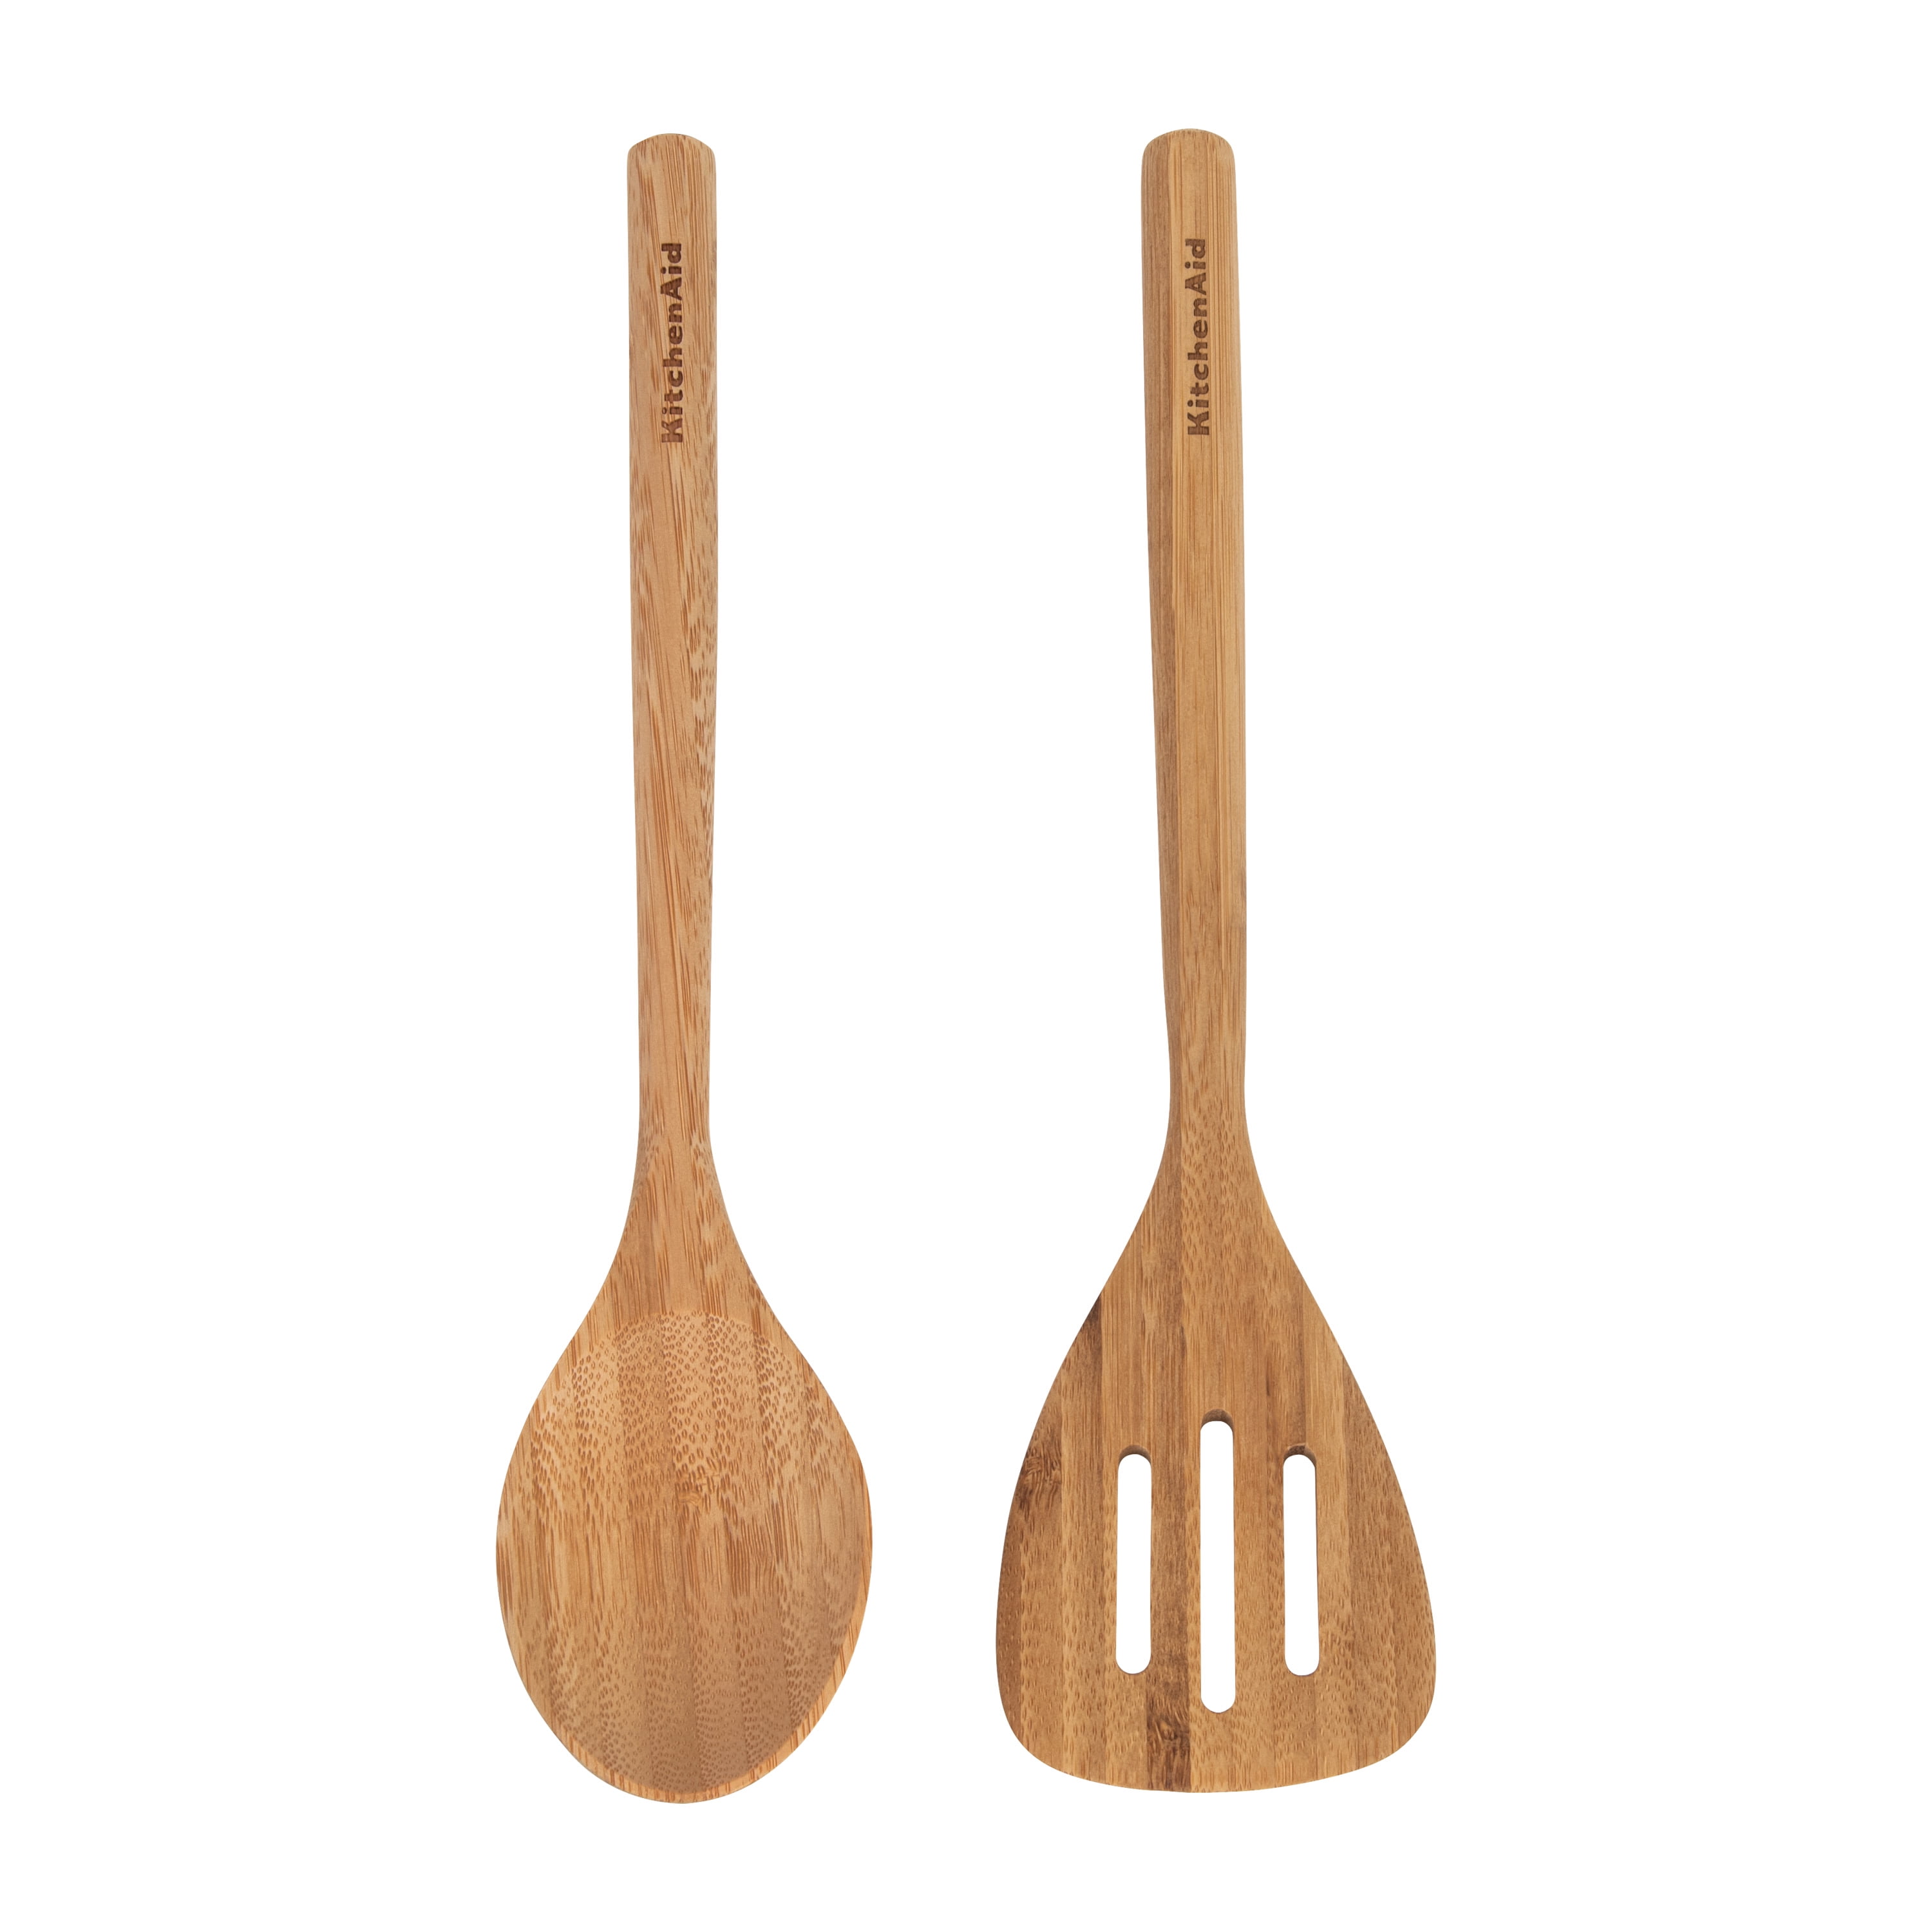 Details about   2Pc Bamboo Spoons Set Wooden Spatula Spoon Kitchen Cooking Utensils Turner Tools